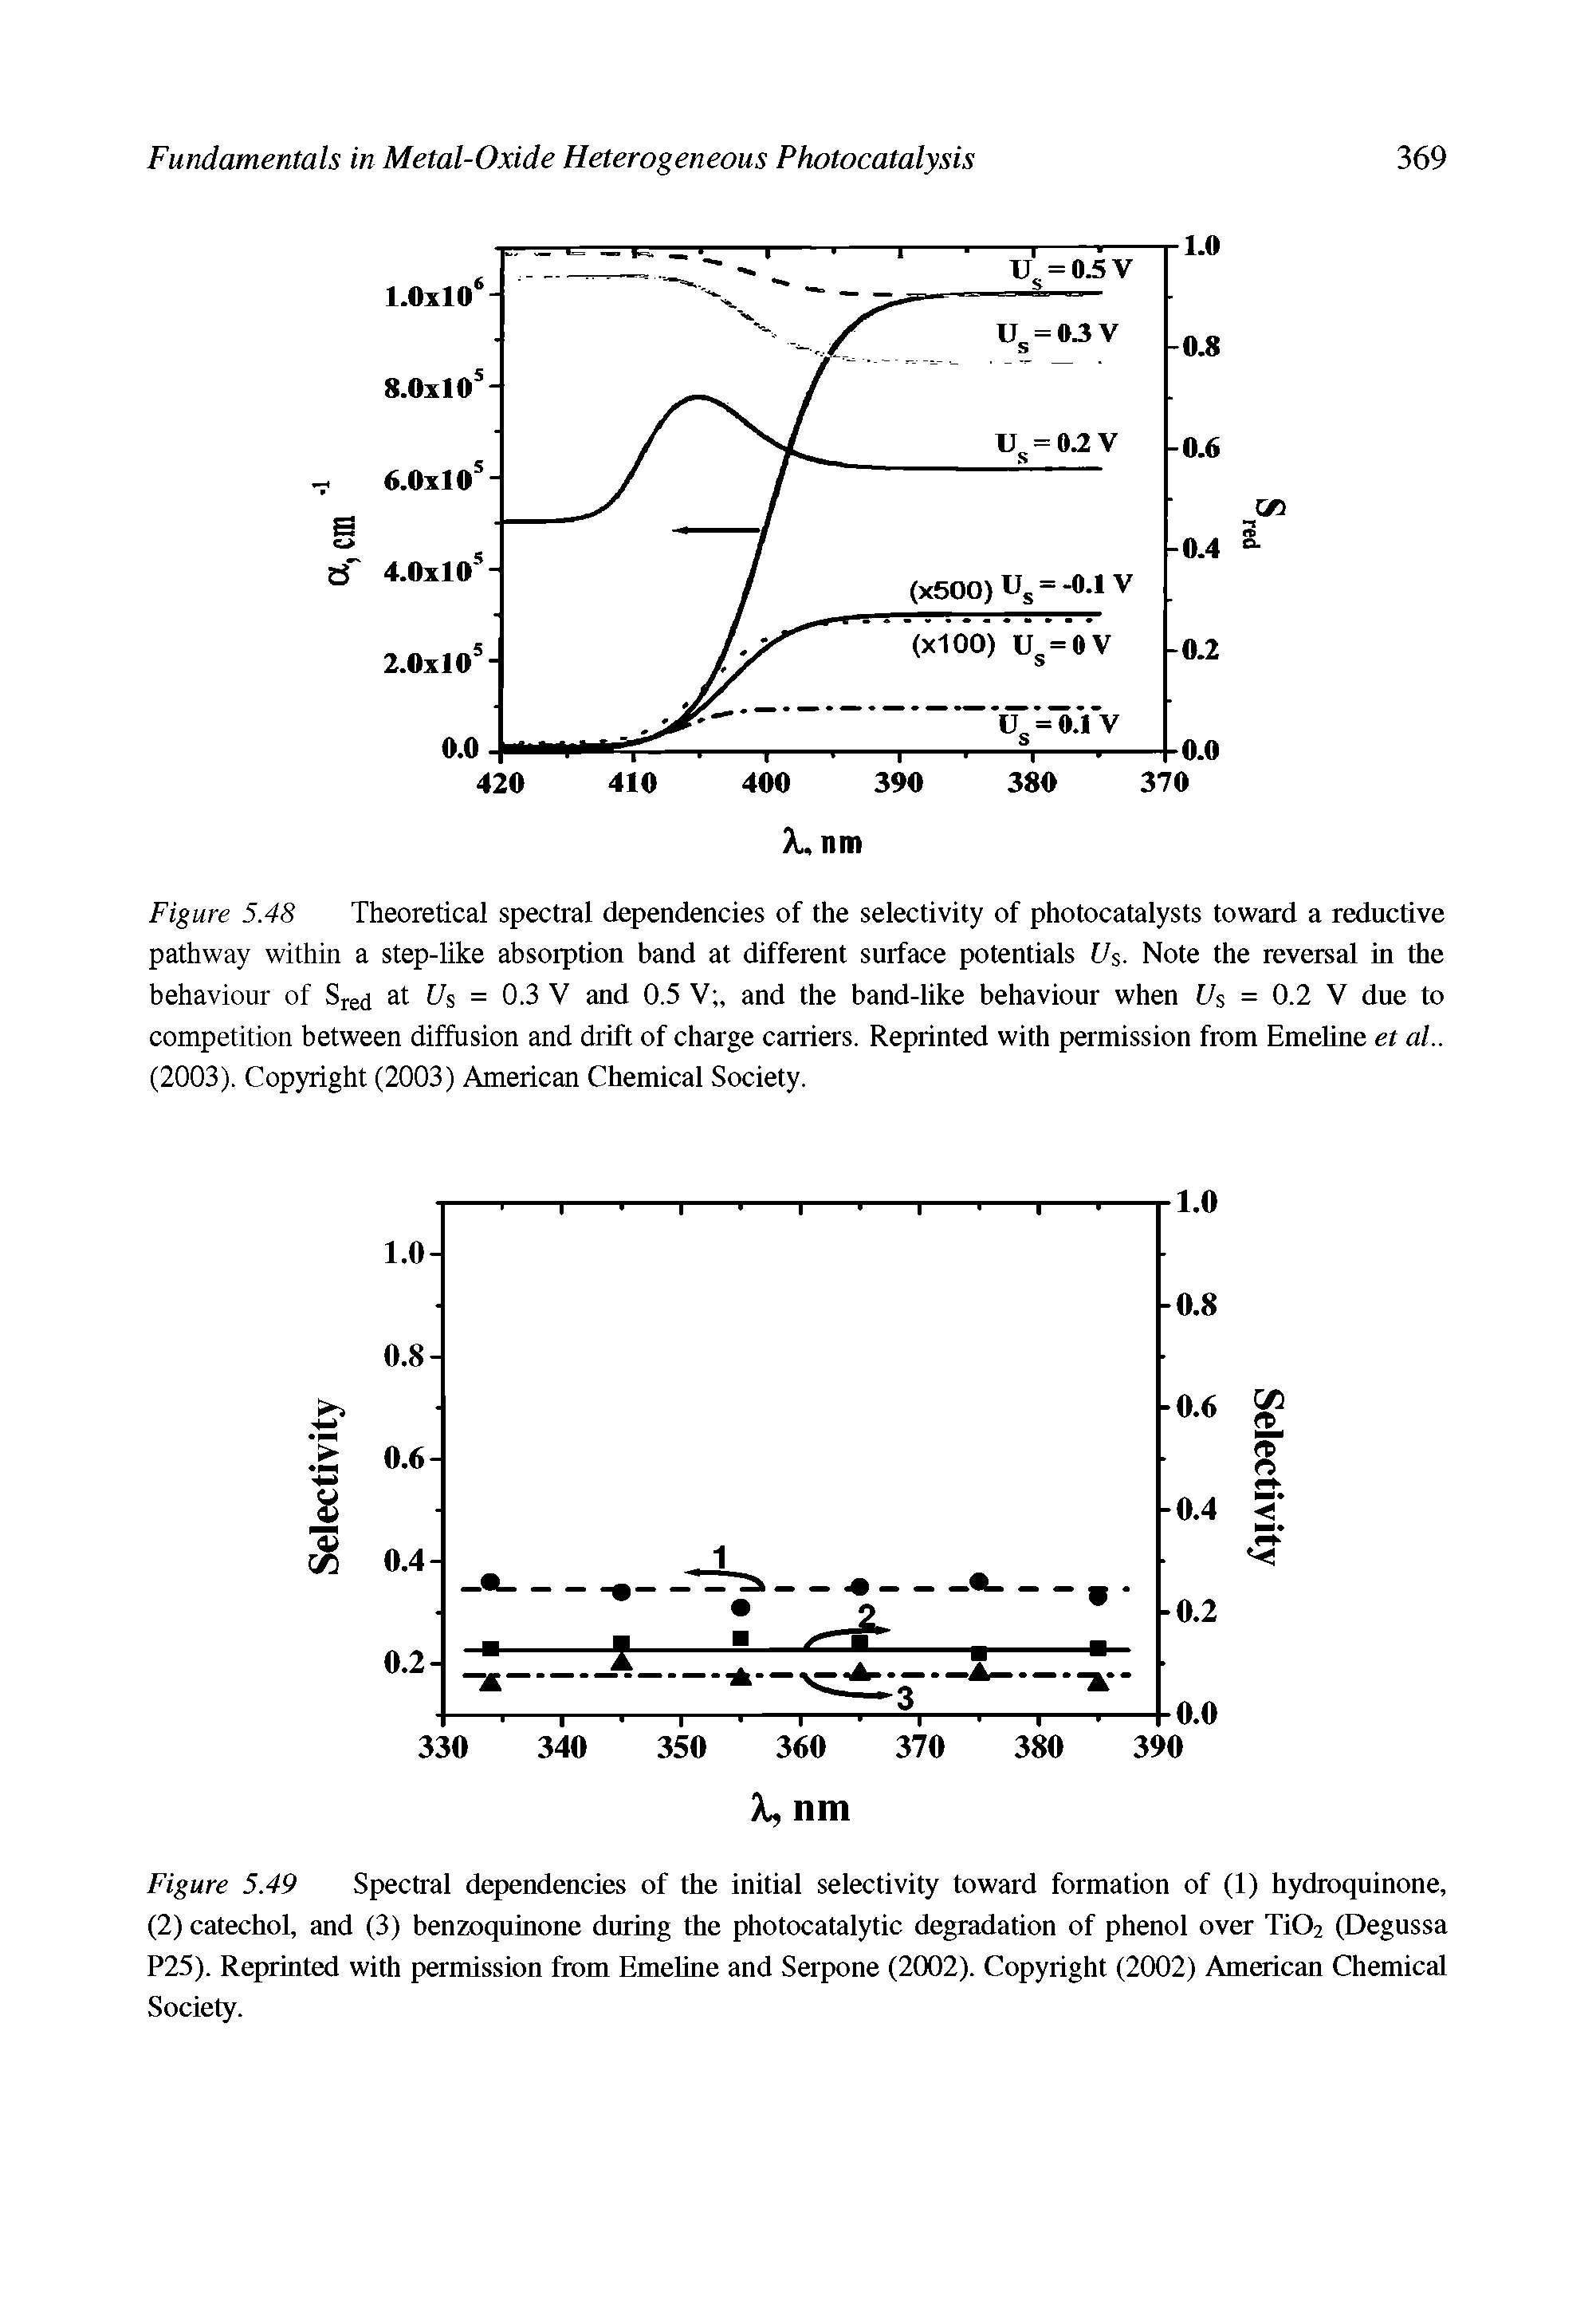 Figure 5.49 Spectral dependencies of the initial selectivity toward formation of (1) hydroquinone, (2) catechol, and (3) benzoquinone during the photocatalytic degradation of phenol over Ti02 (Degussa P25). Reprinted with permission from EmeUne and Serpone (2002). Copyright (2002) American Chemical Society.